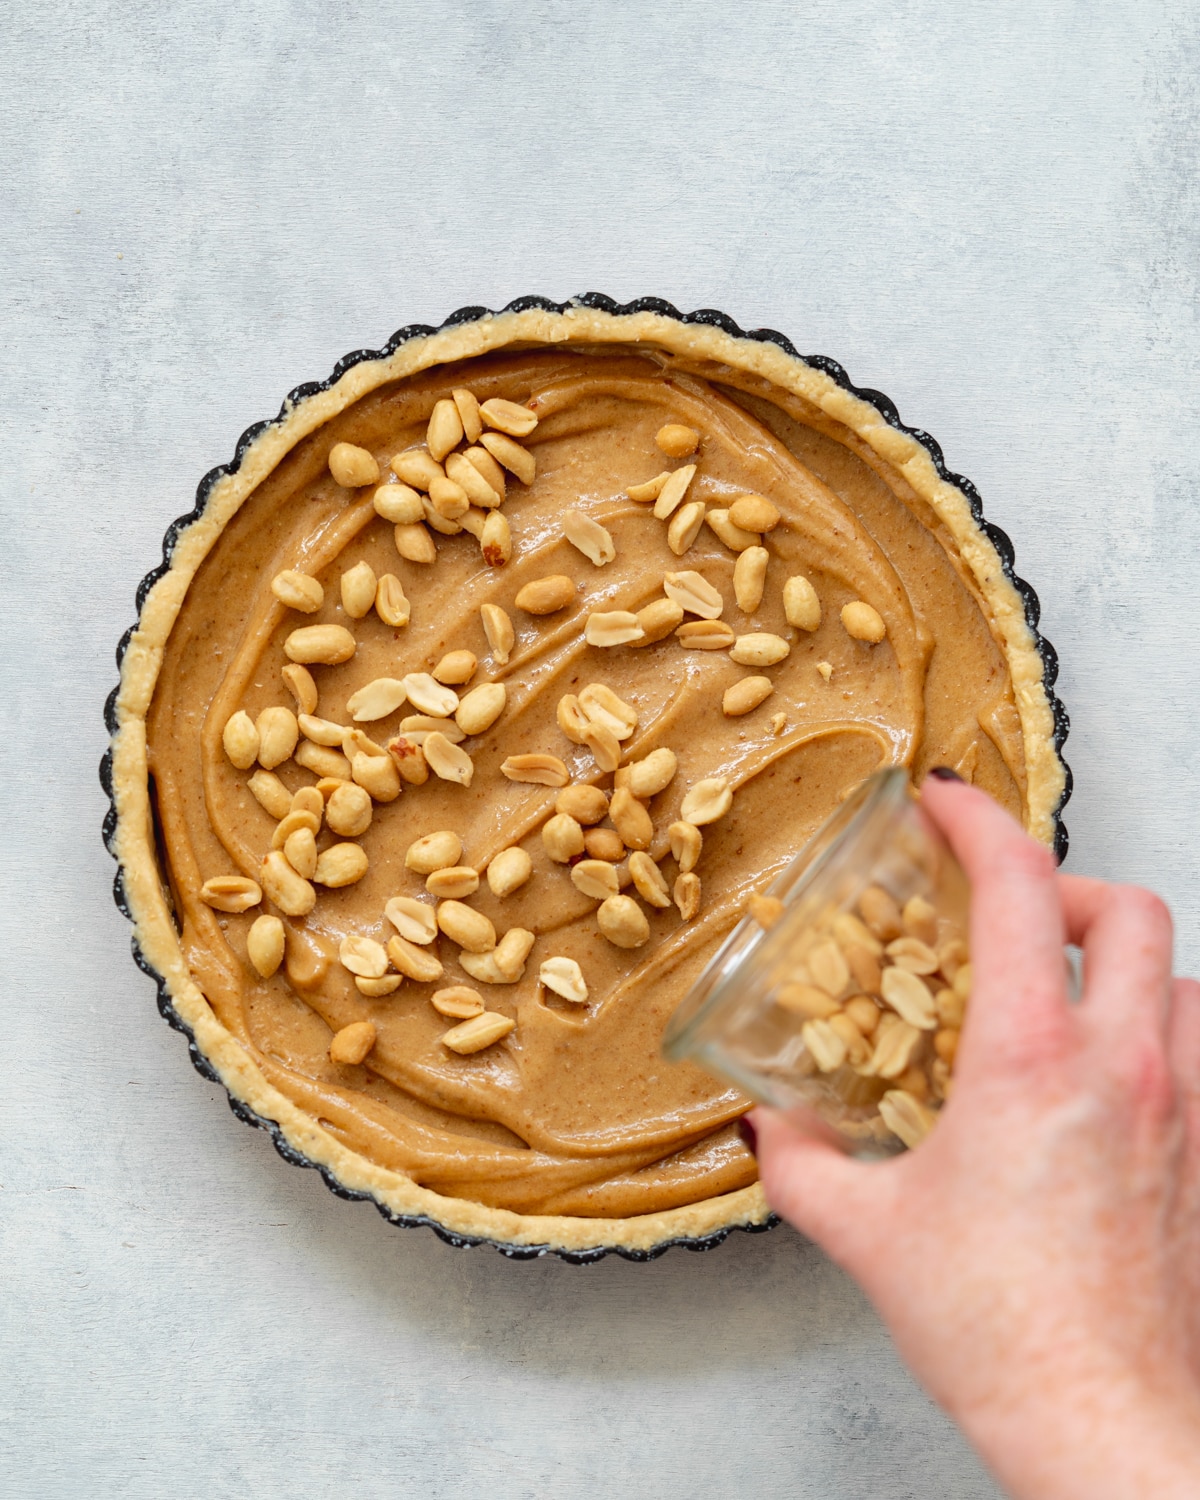 pouring roasted peanuts on top of caramel in a tart base.